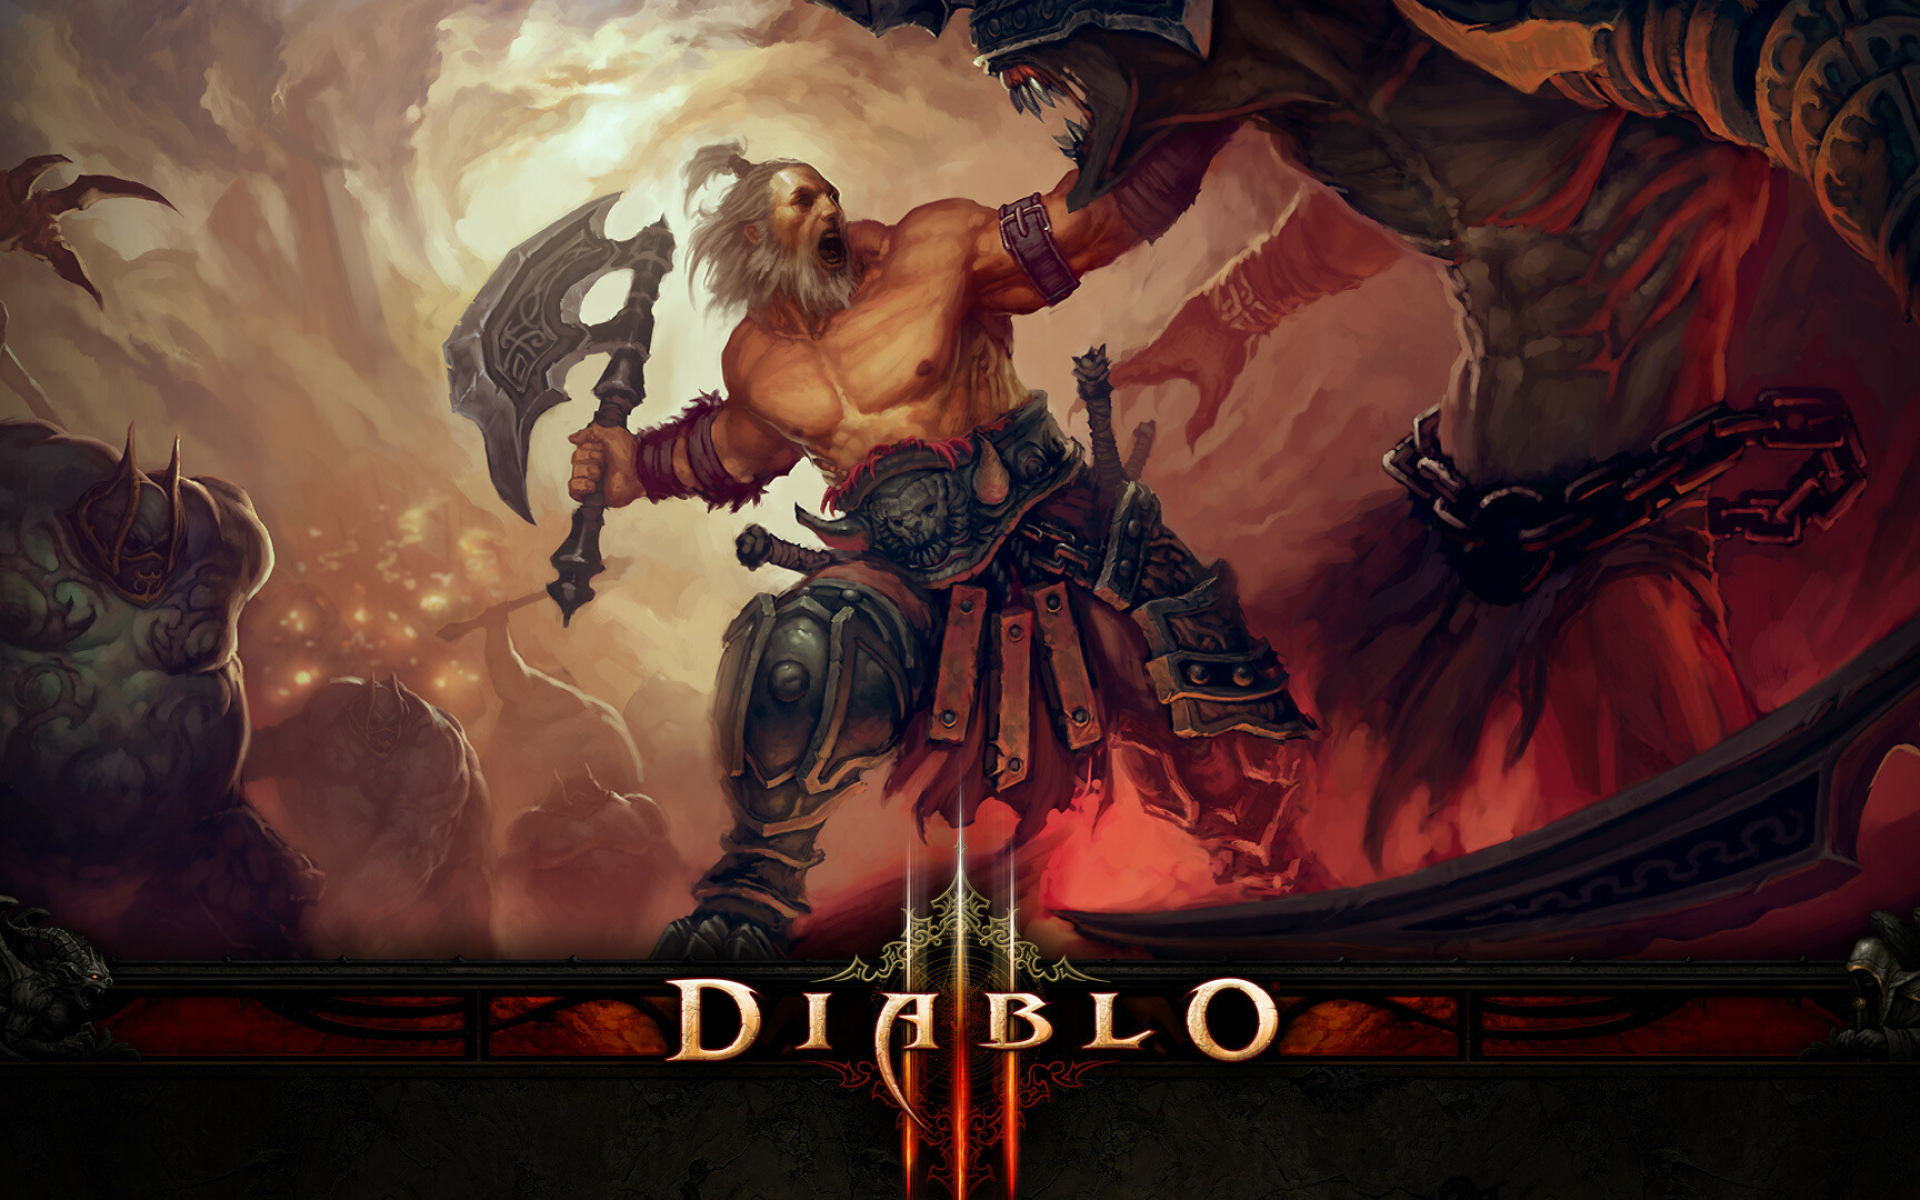 Diablo: Weapons, Shields, Armor, Helms, Rings, and Amulets are the basic types of equipment, Any character can use any piece of equipment so long as they meet its statistical requirements. 1920x1200 HD Background.